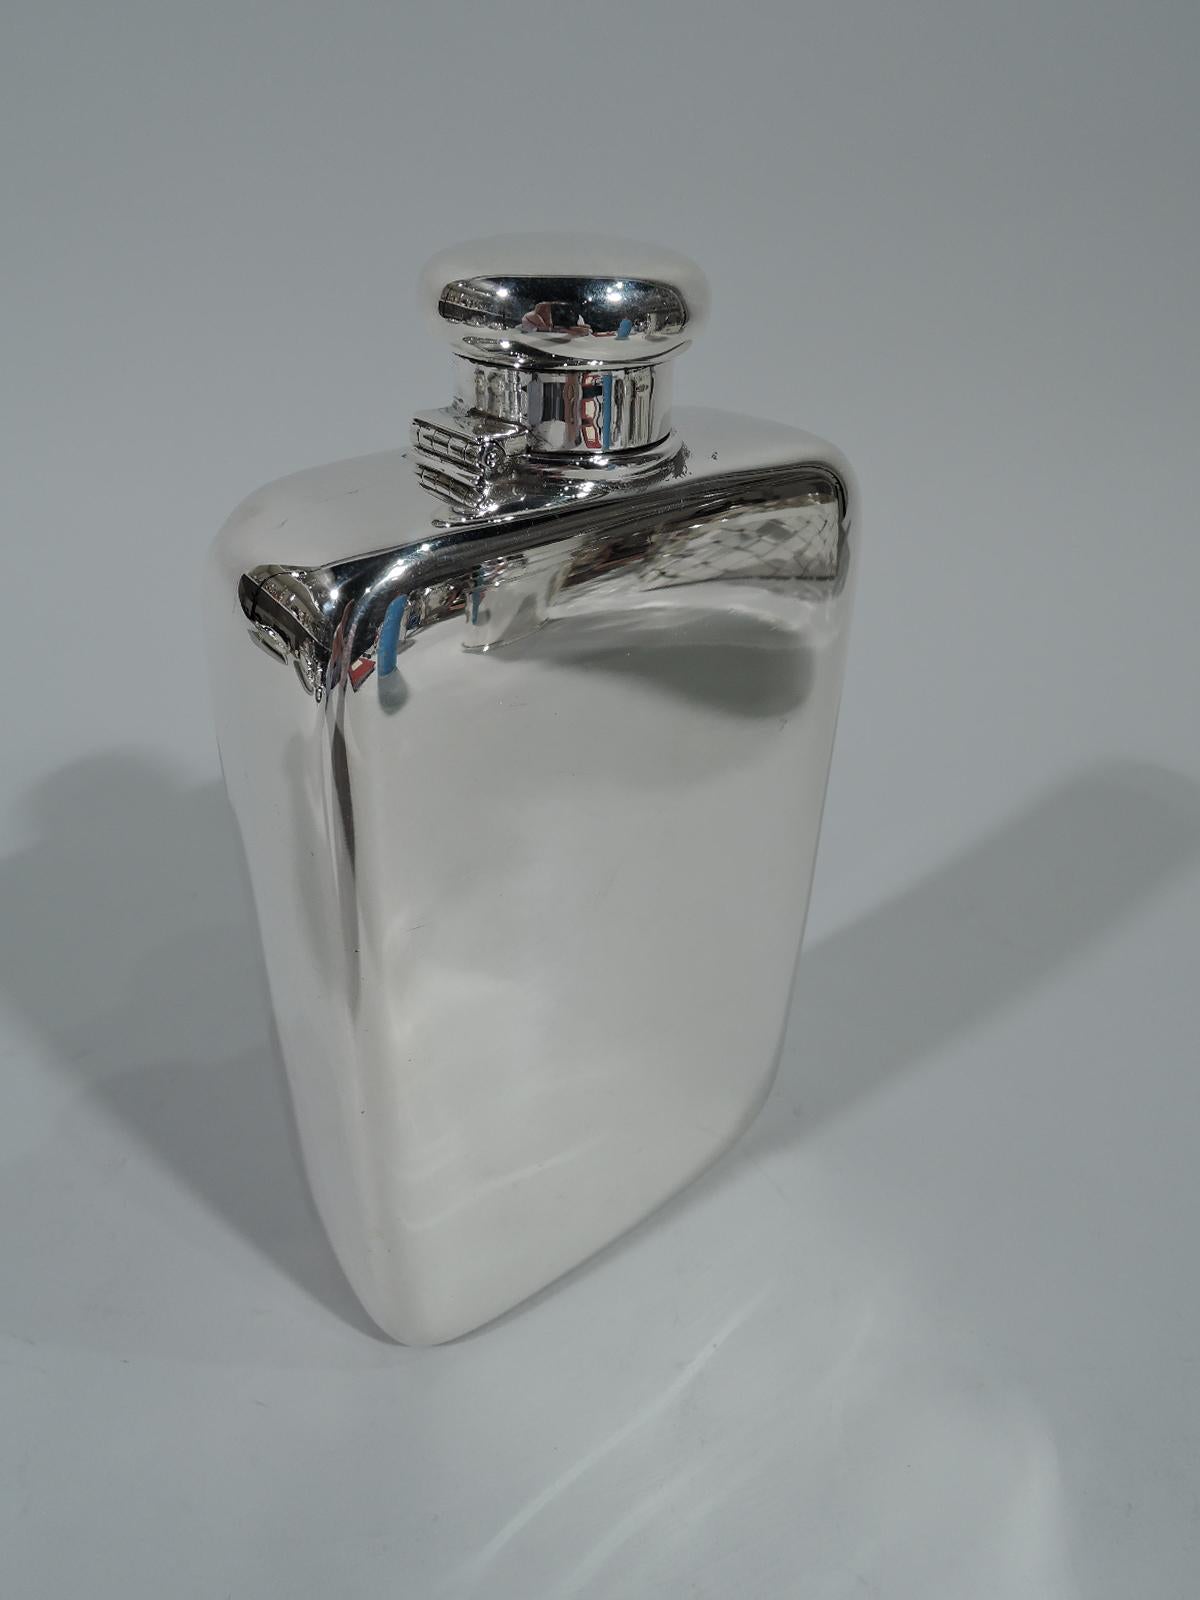 Bold and modern sterling silver flask. Made by Tiffany & Co. in New York. Quadrilateral with flat bottom and top. Short neck with hinged and cork-lined bun cover. Manly size – requires a large hand span to grip. Hallmark includes no. 18230 (first